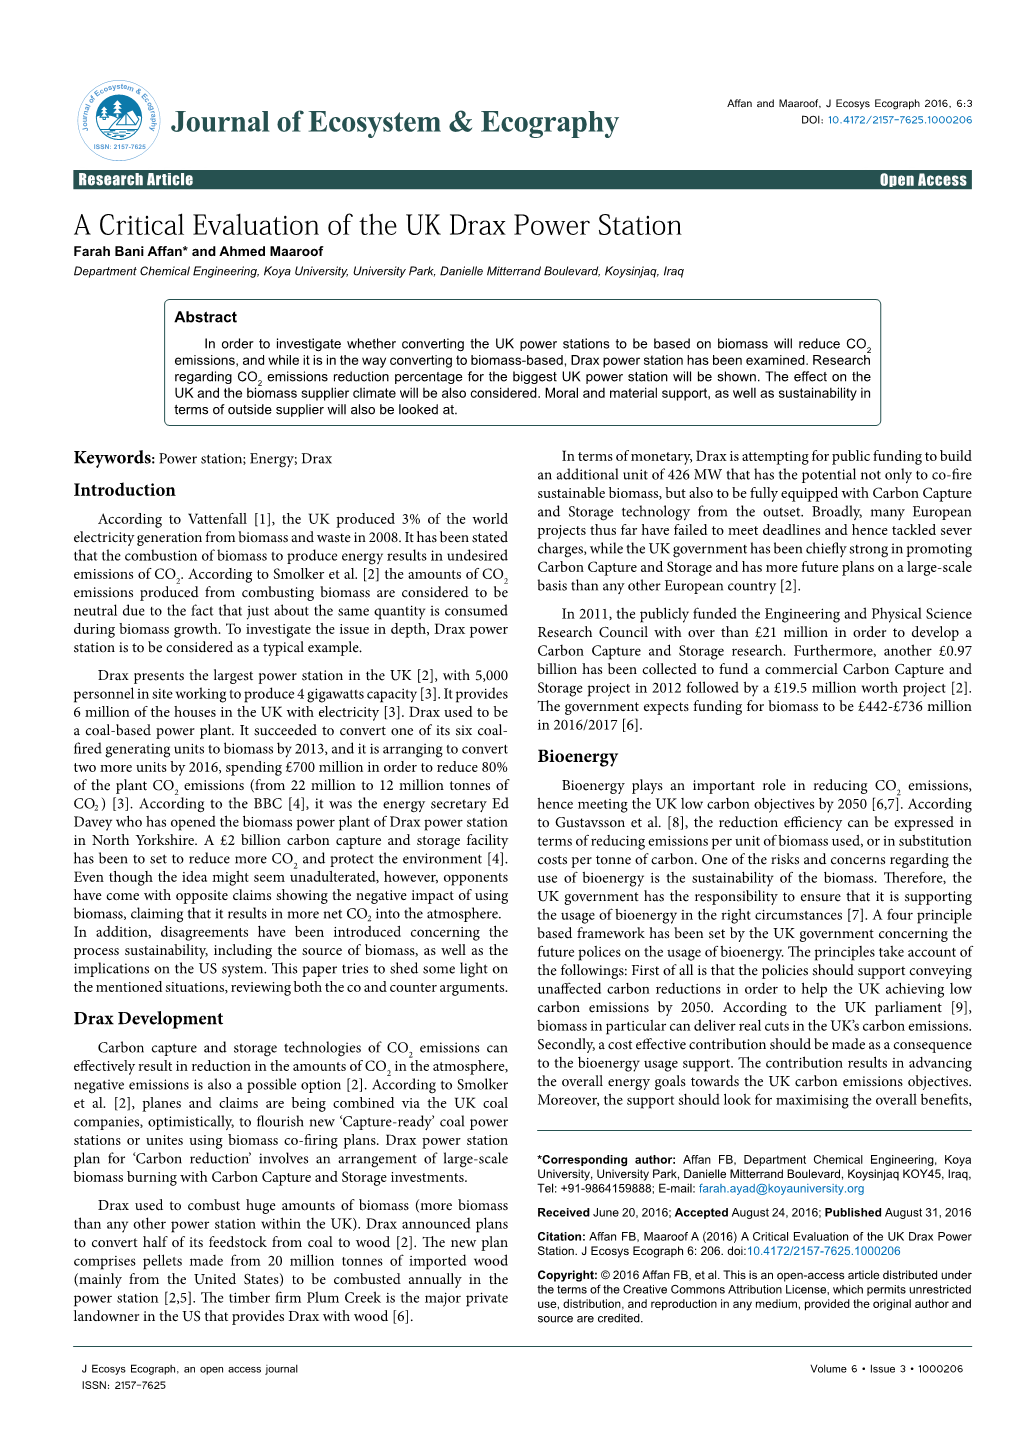 A Critical Evaluation of the UK Drax Power Station